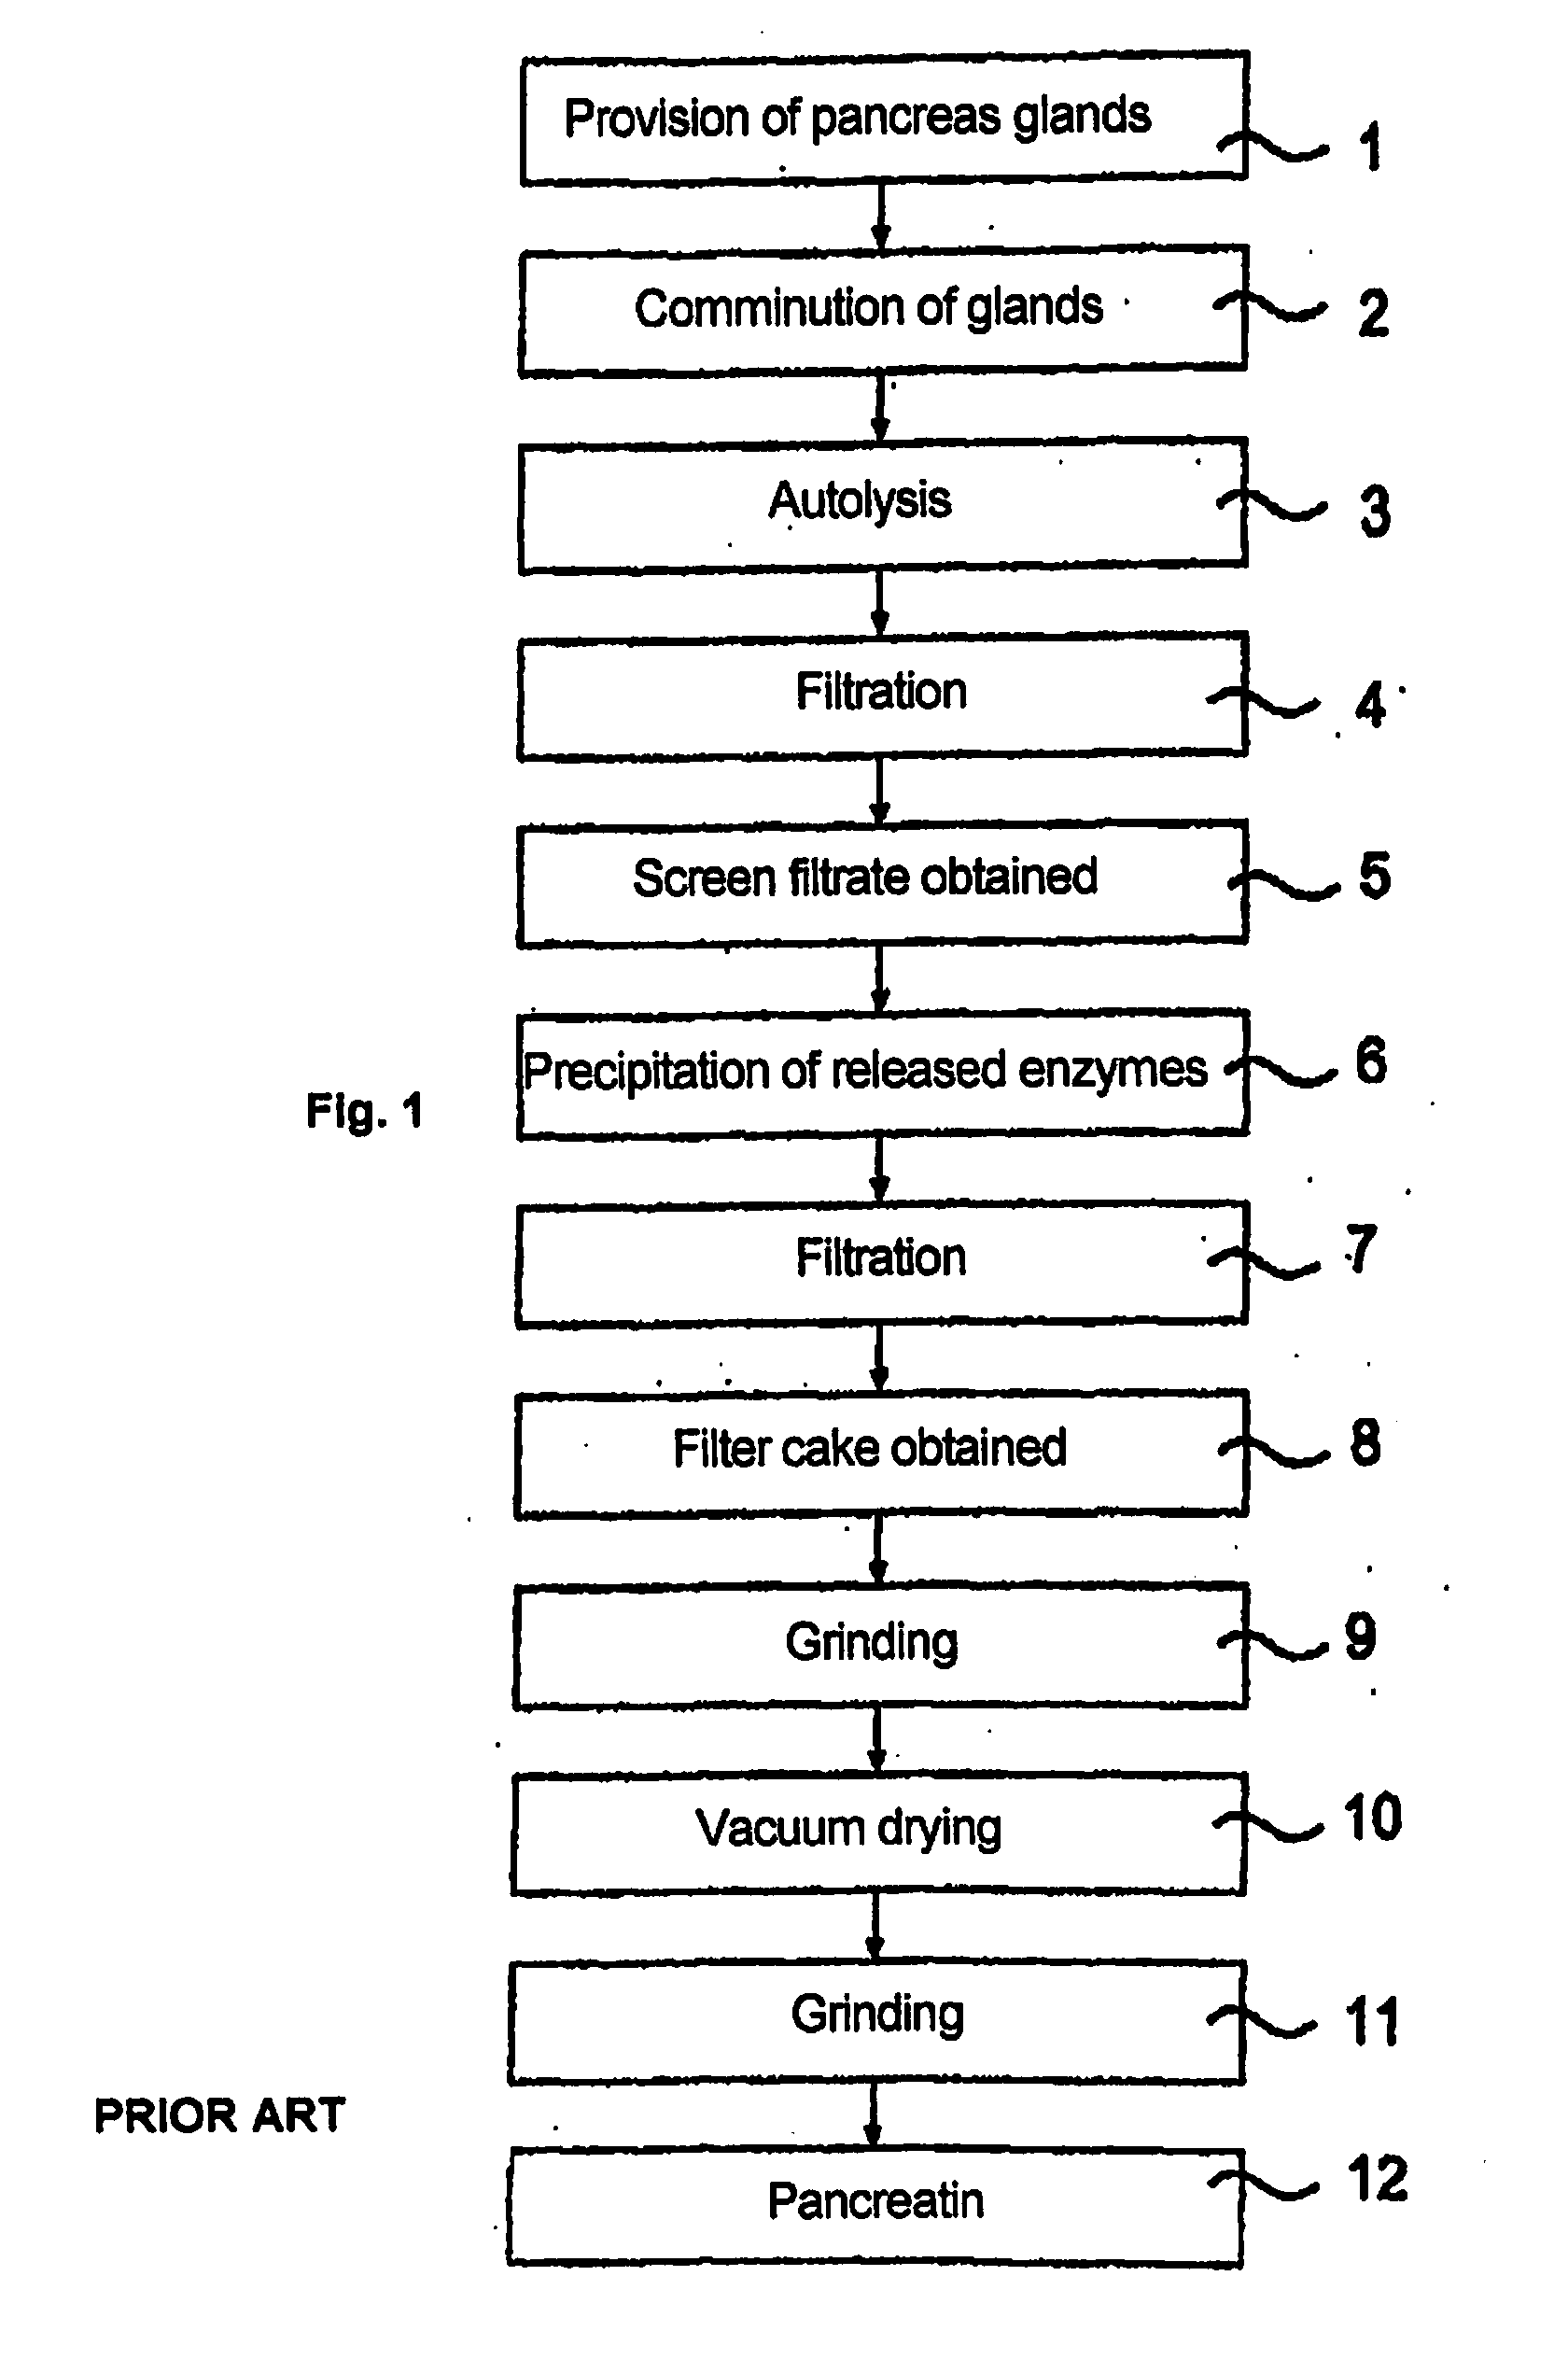 Method for reducing the viral and microbial load of biological extracts containing solids